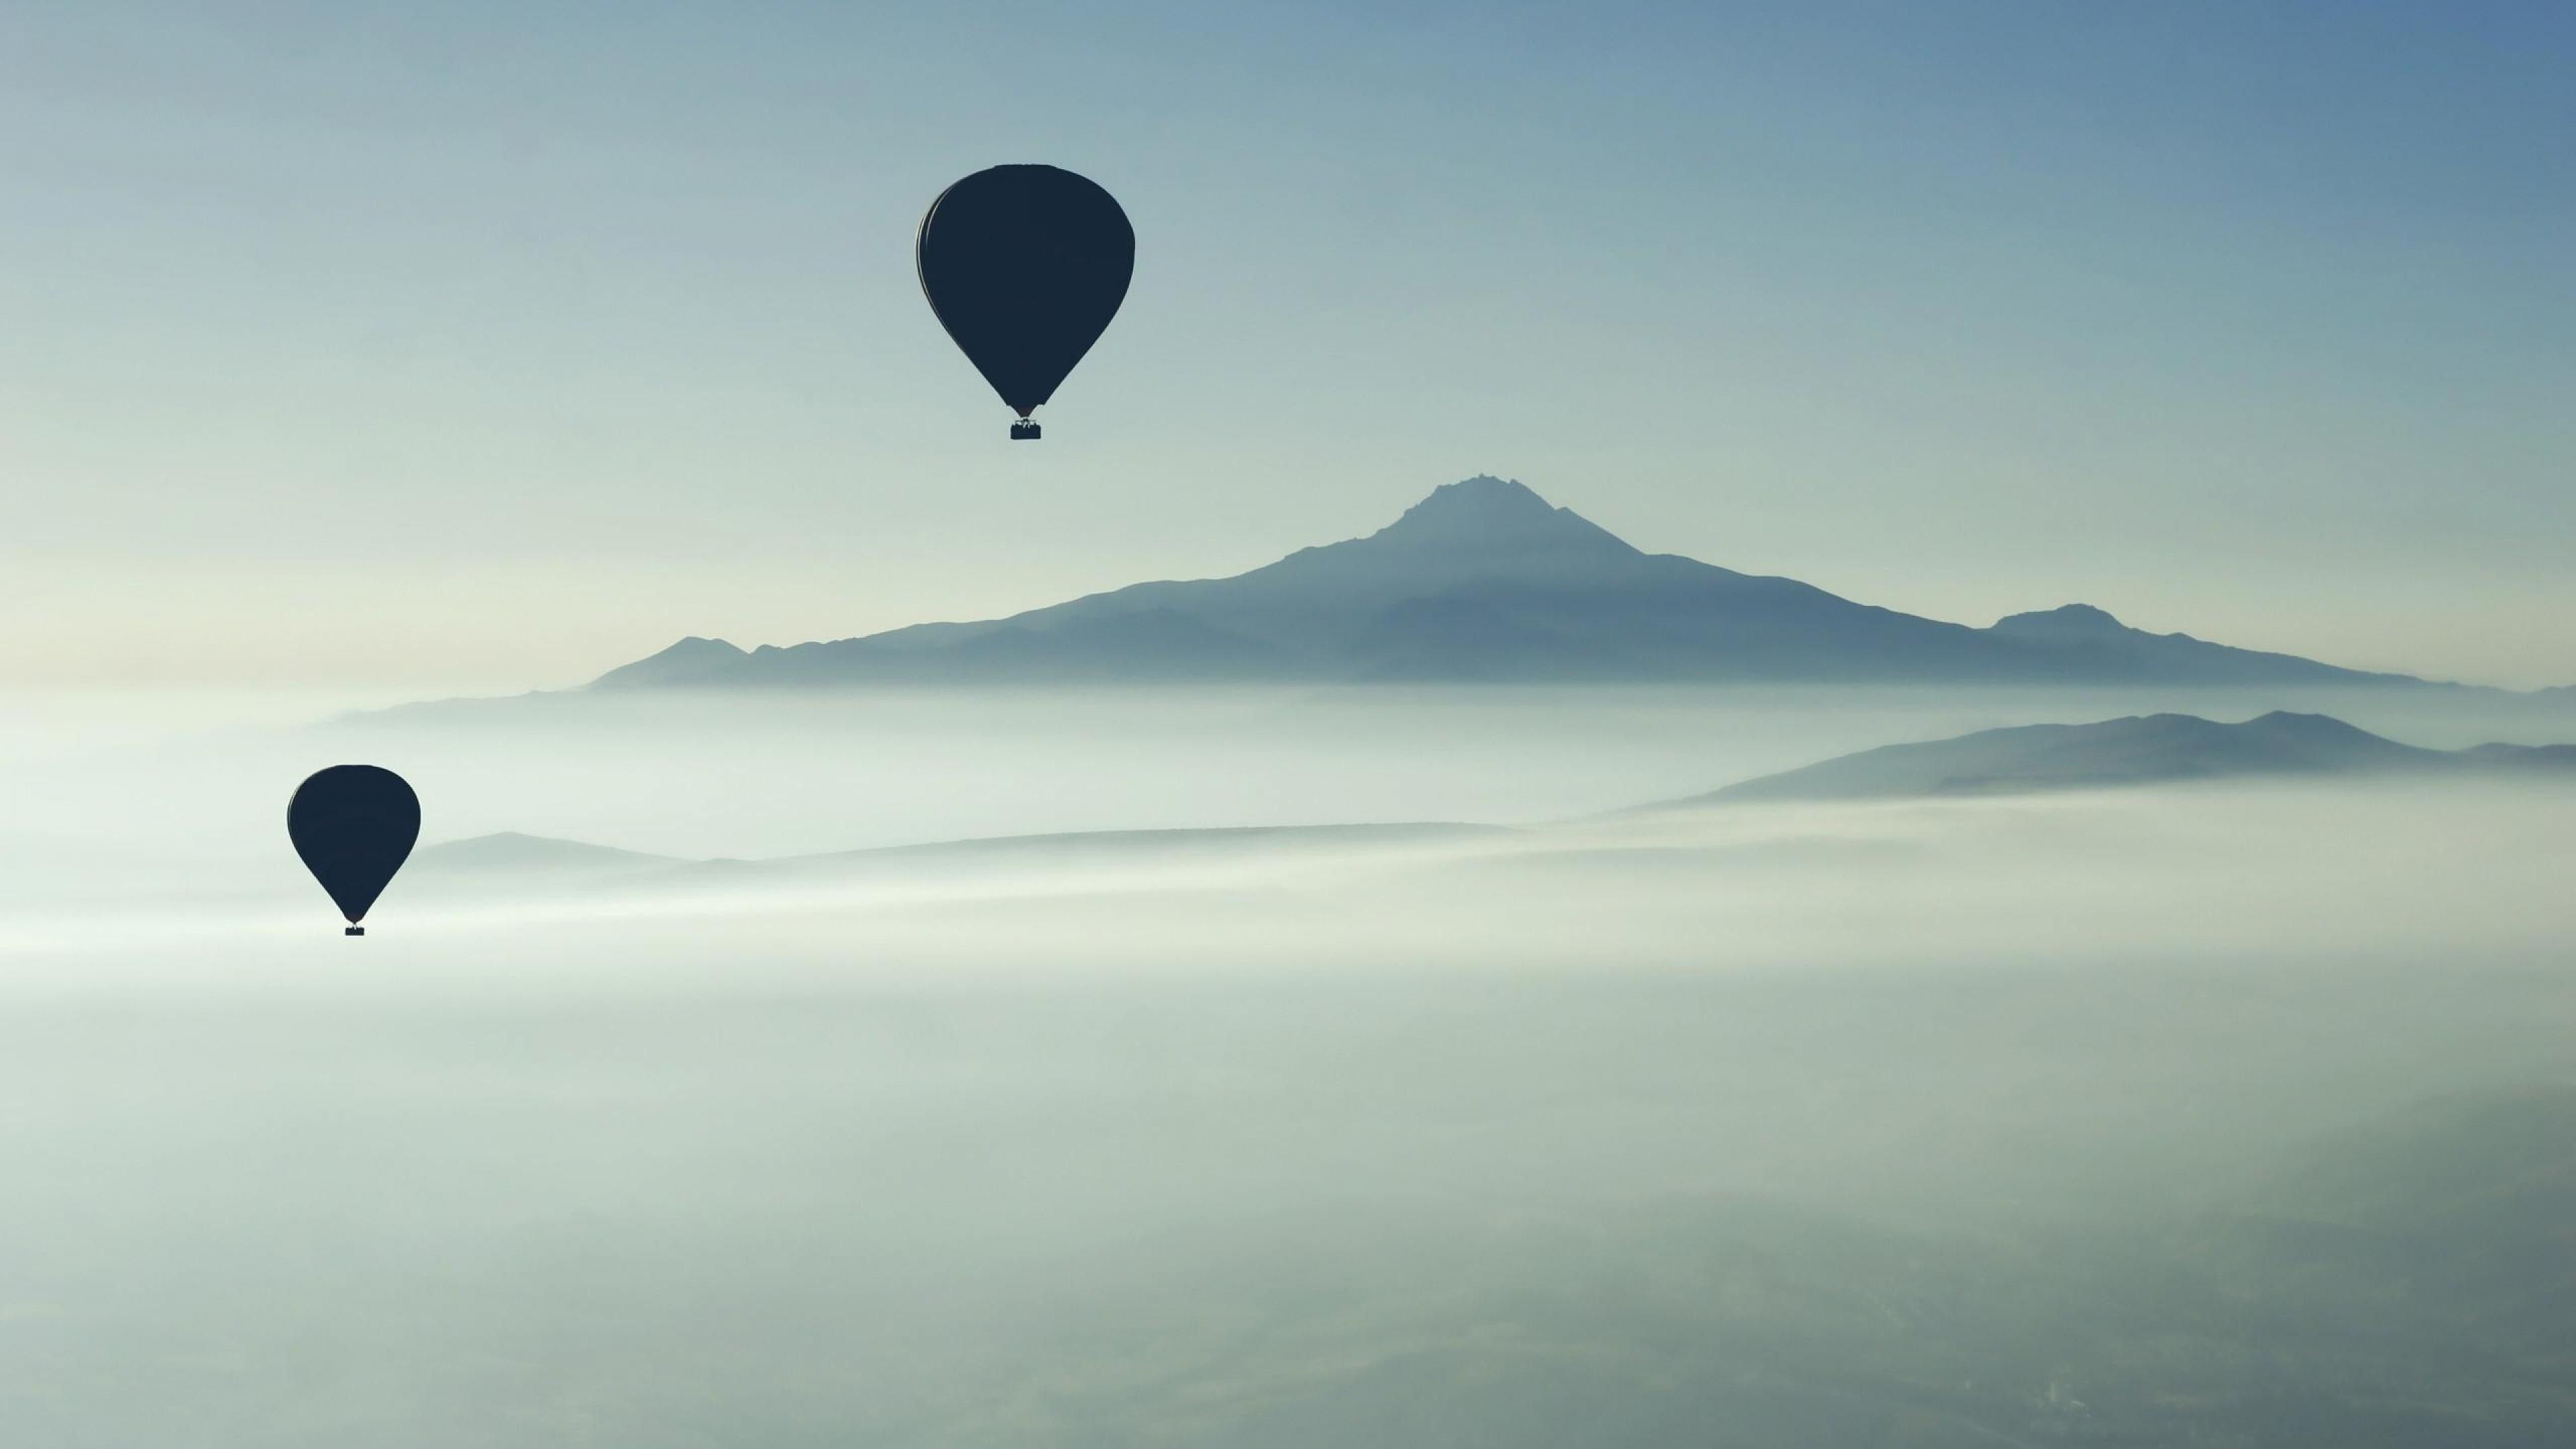 Wallpaper Blue Hot Air Balloon Flying Over The Mountains During Daytime, Background Free Image